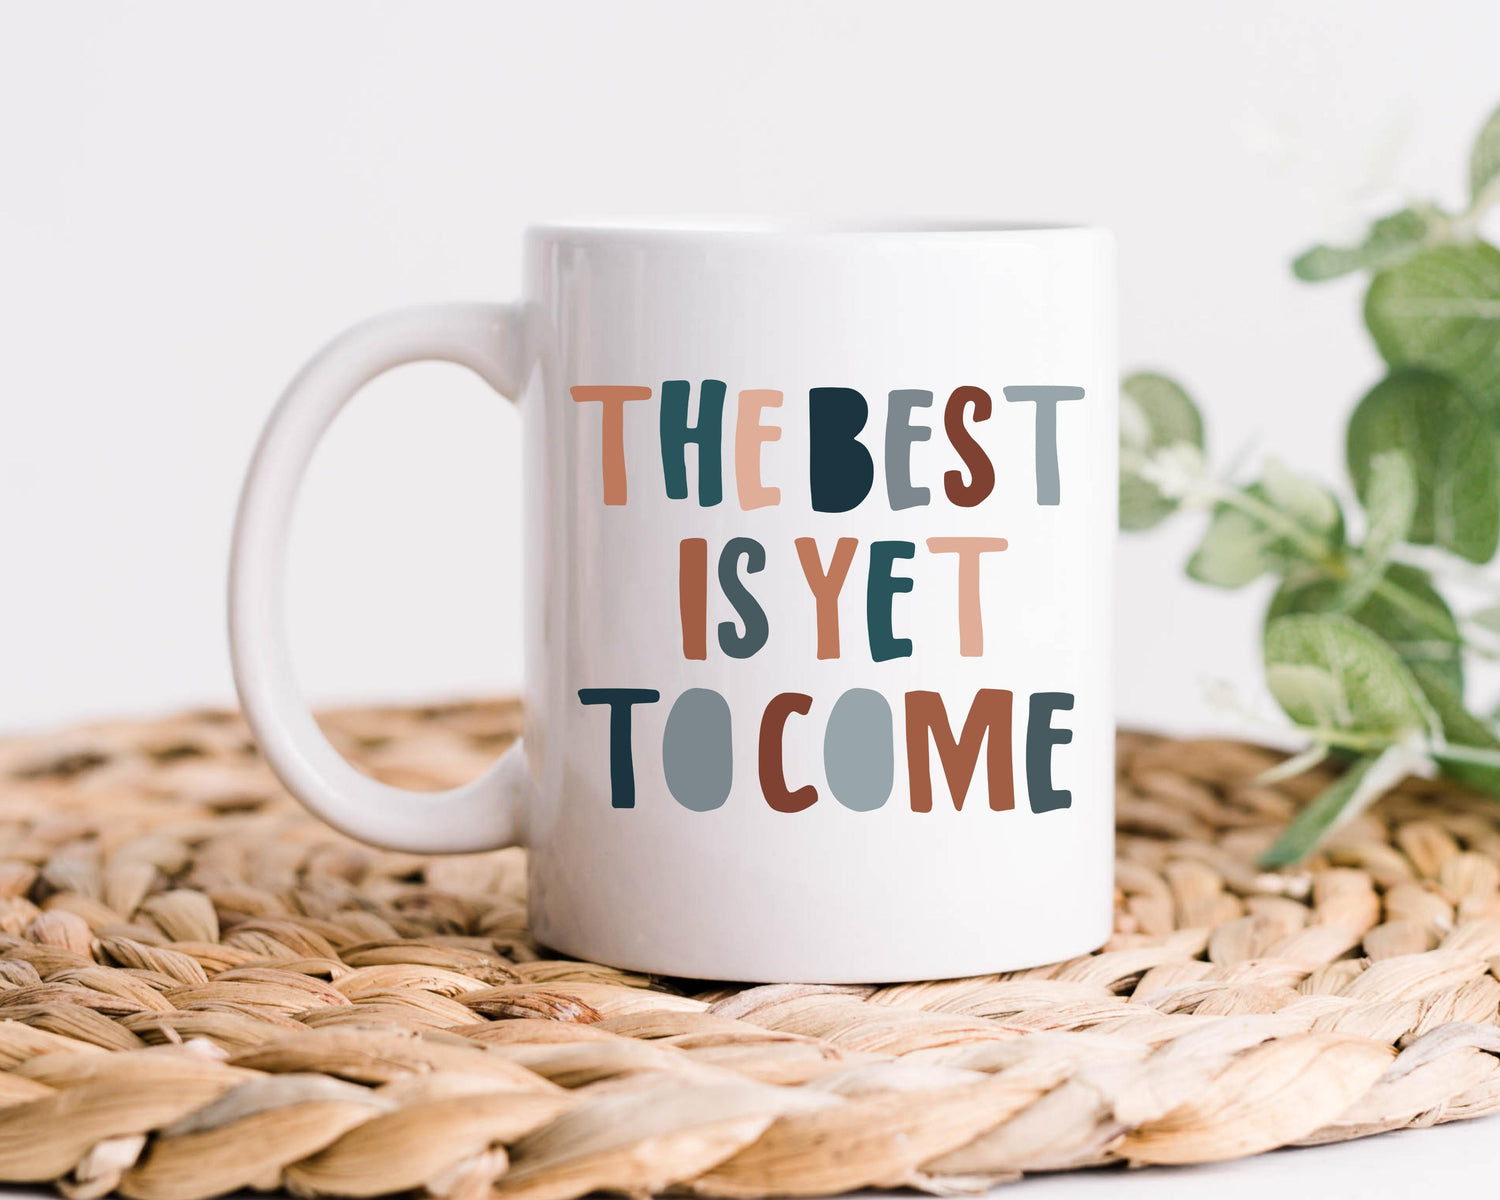 Mug The best is yet to come